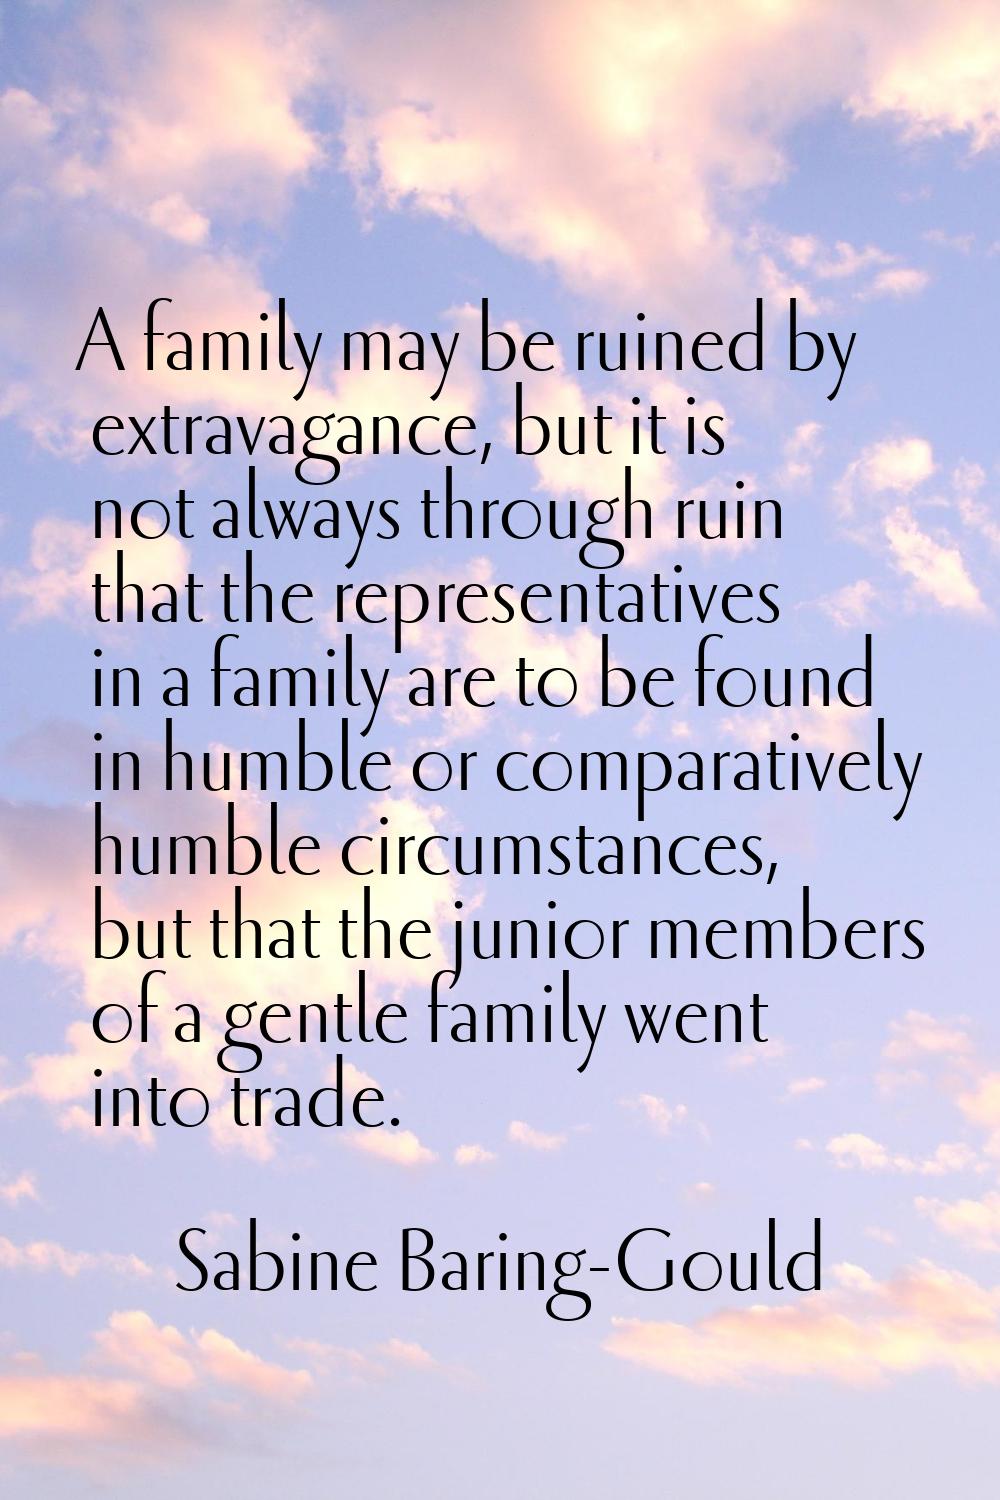 A family may be ruined by extravagance, but it is not always through ruin that the representatives 